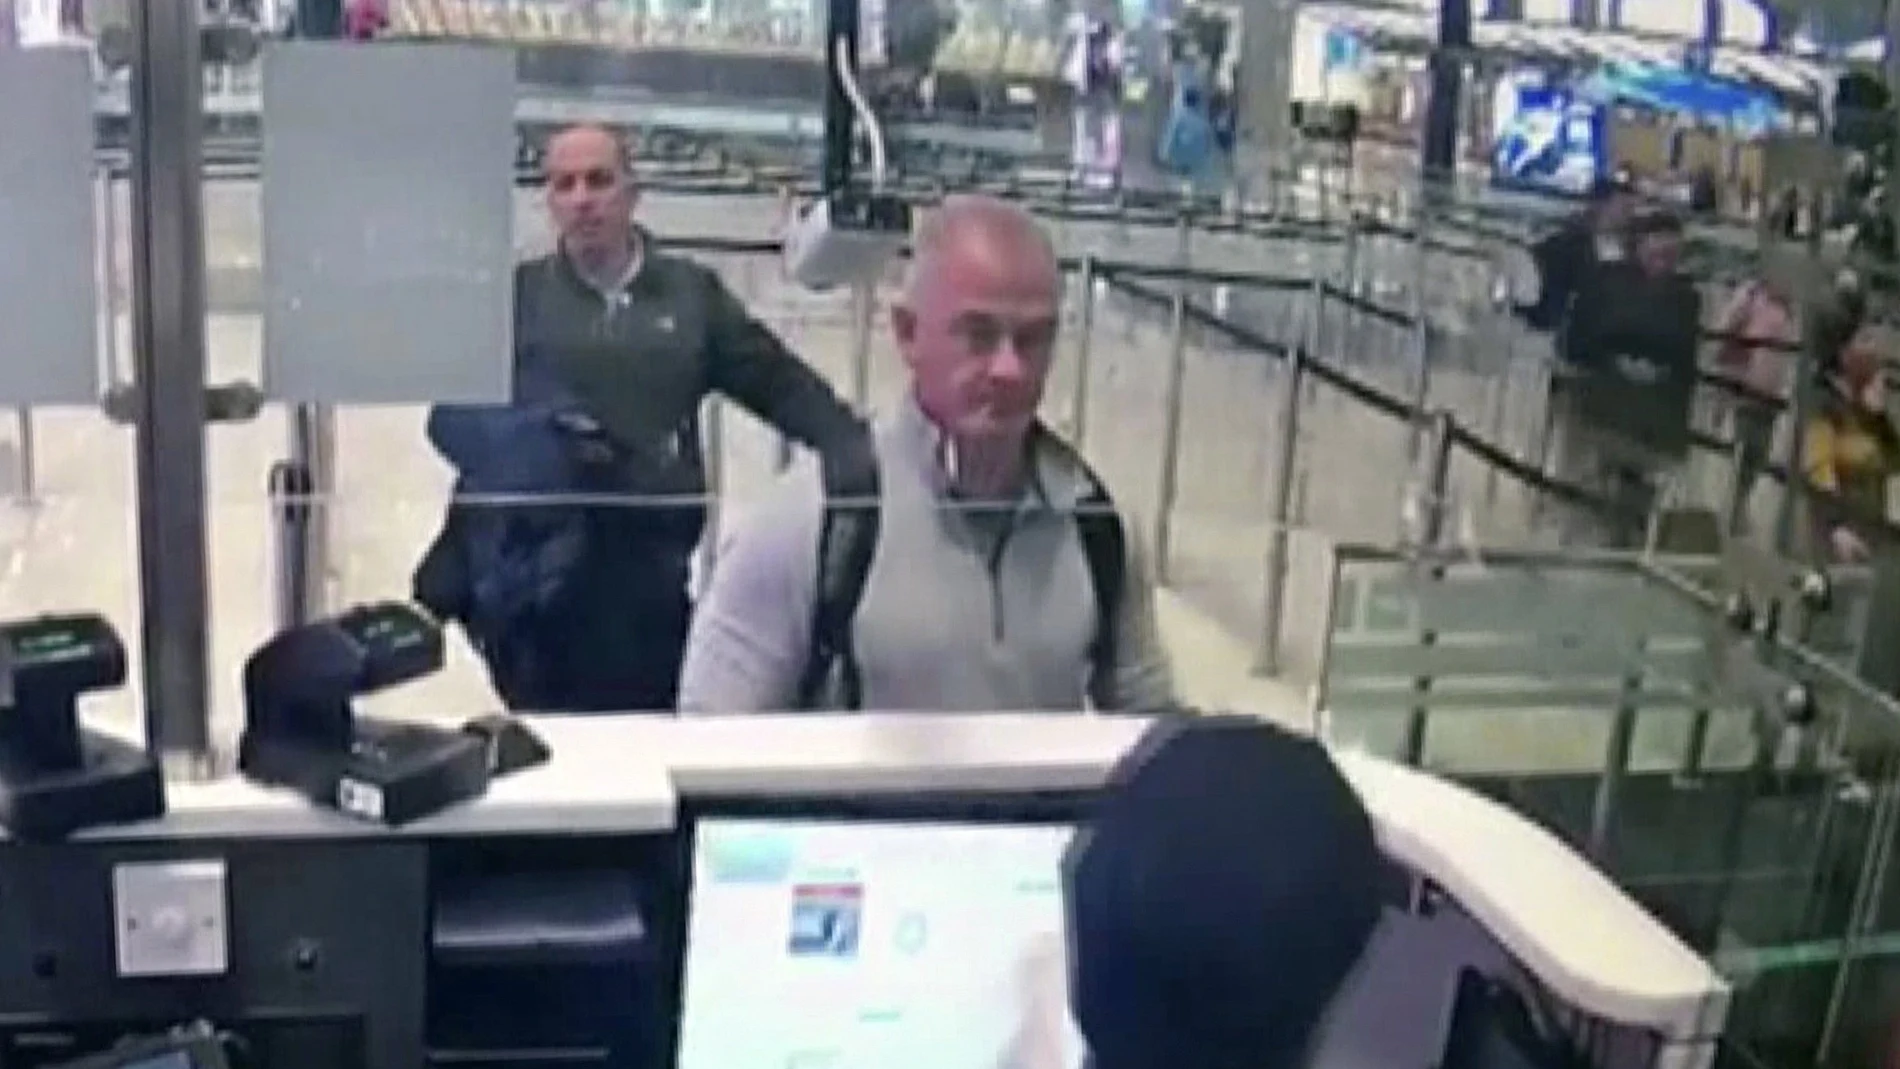 FILE â€” This Dec. 30, 2019, image from security camera video shows Michael L. Taylor, center, and George-Antoine Zayek at passport control at Istanbul Airport in Turkey. A Tokyo court handed down prison terms for the American father Michael Taylor and son Peter accused of helping Nissanâ€™s former chairman, Carlos Ghosn, escape to Lebanon while awaiting trial in Japan.(DHA via AP, File)